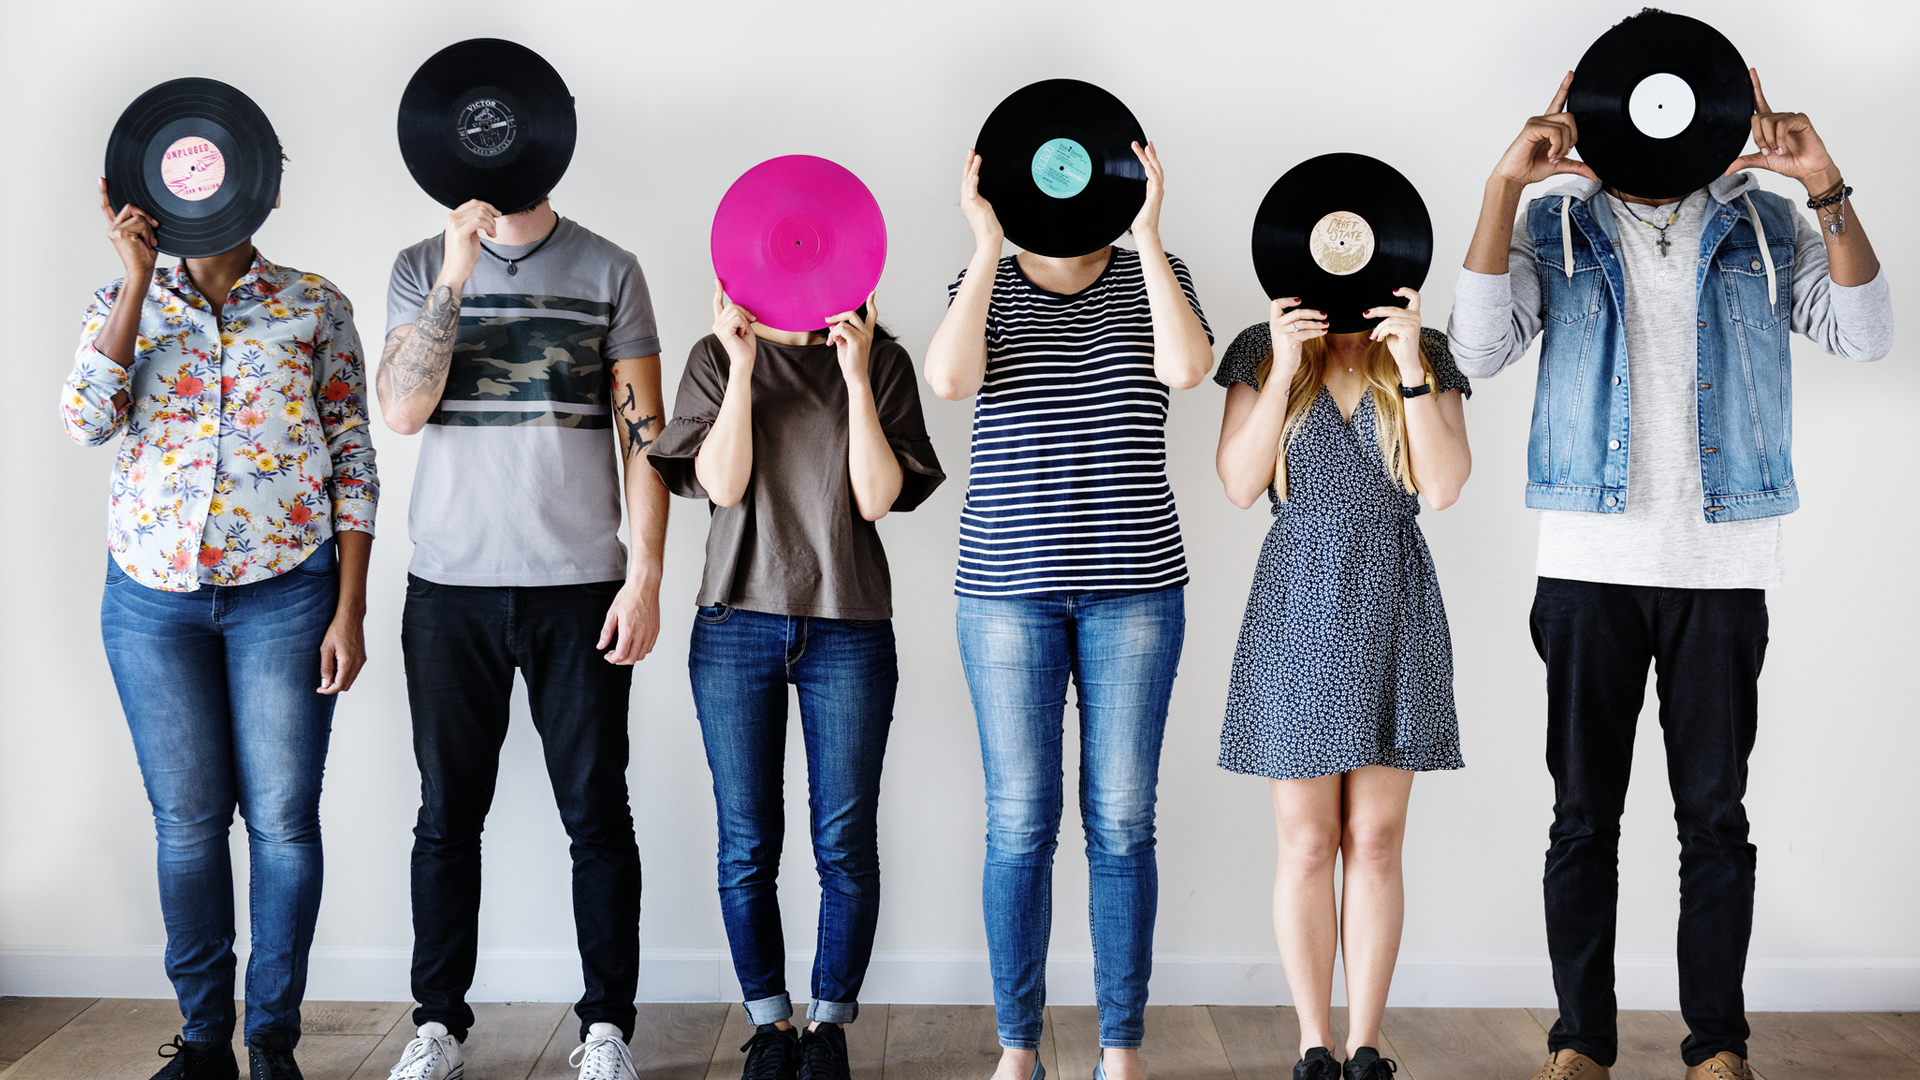 A line of people holding records up to their faces